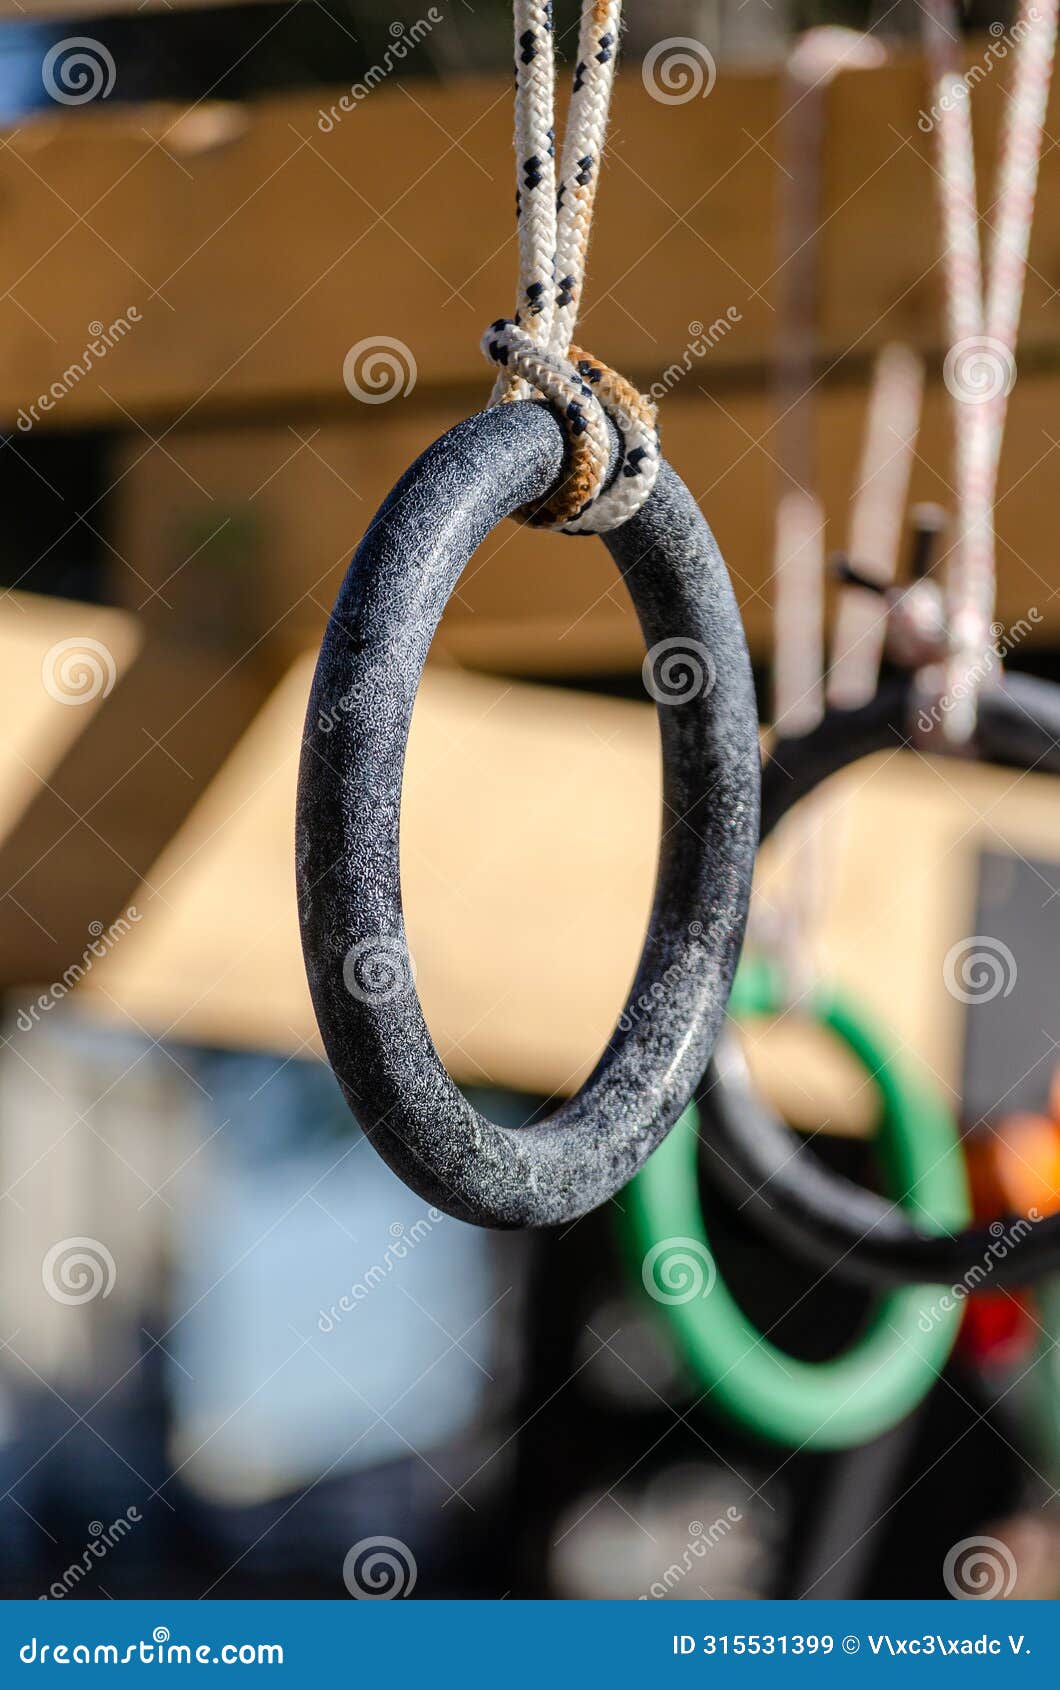 selective focus. detail of the rings of one of the obstacles of an obstacle race course, ocr